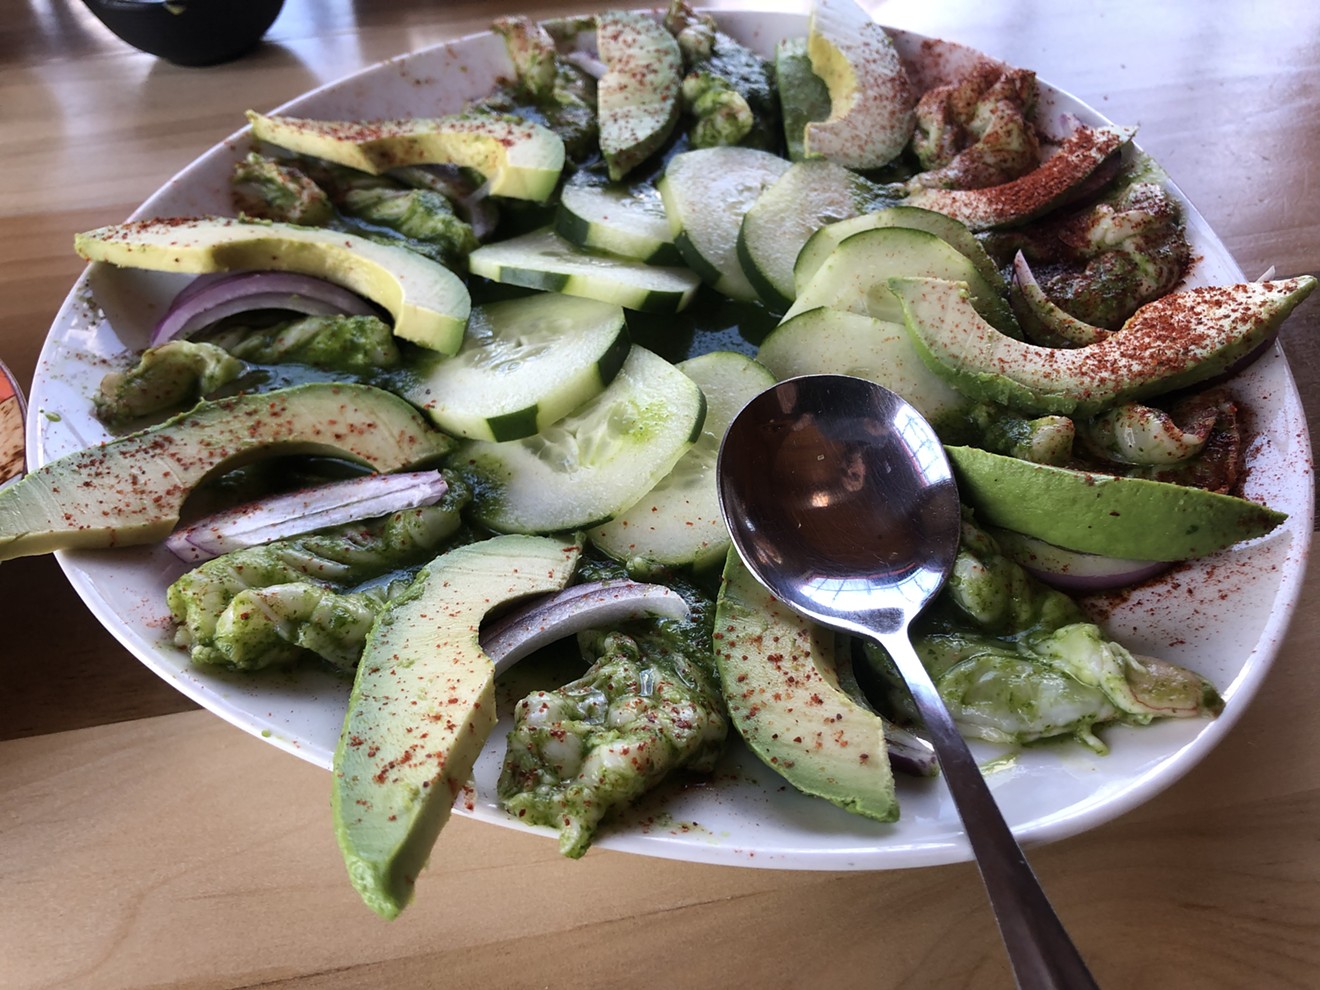 A fanned-out aguachile from Casa Corazon.